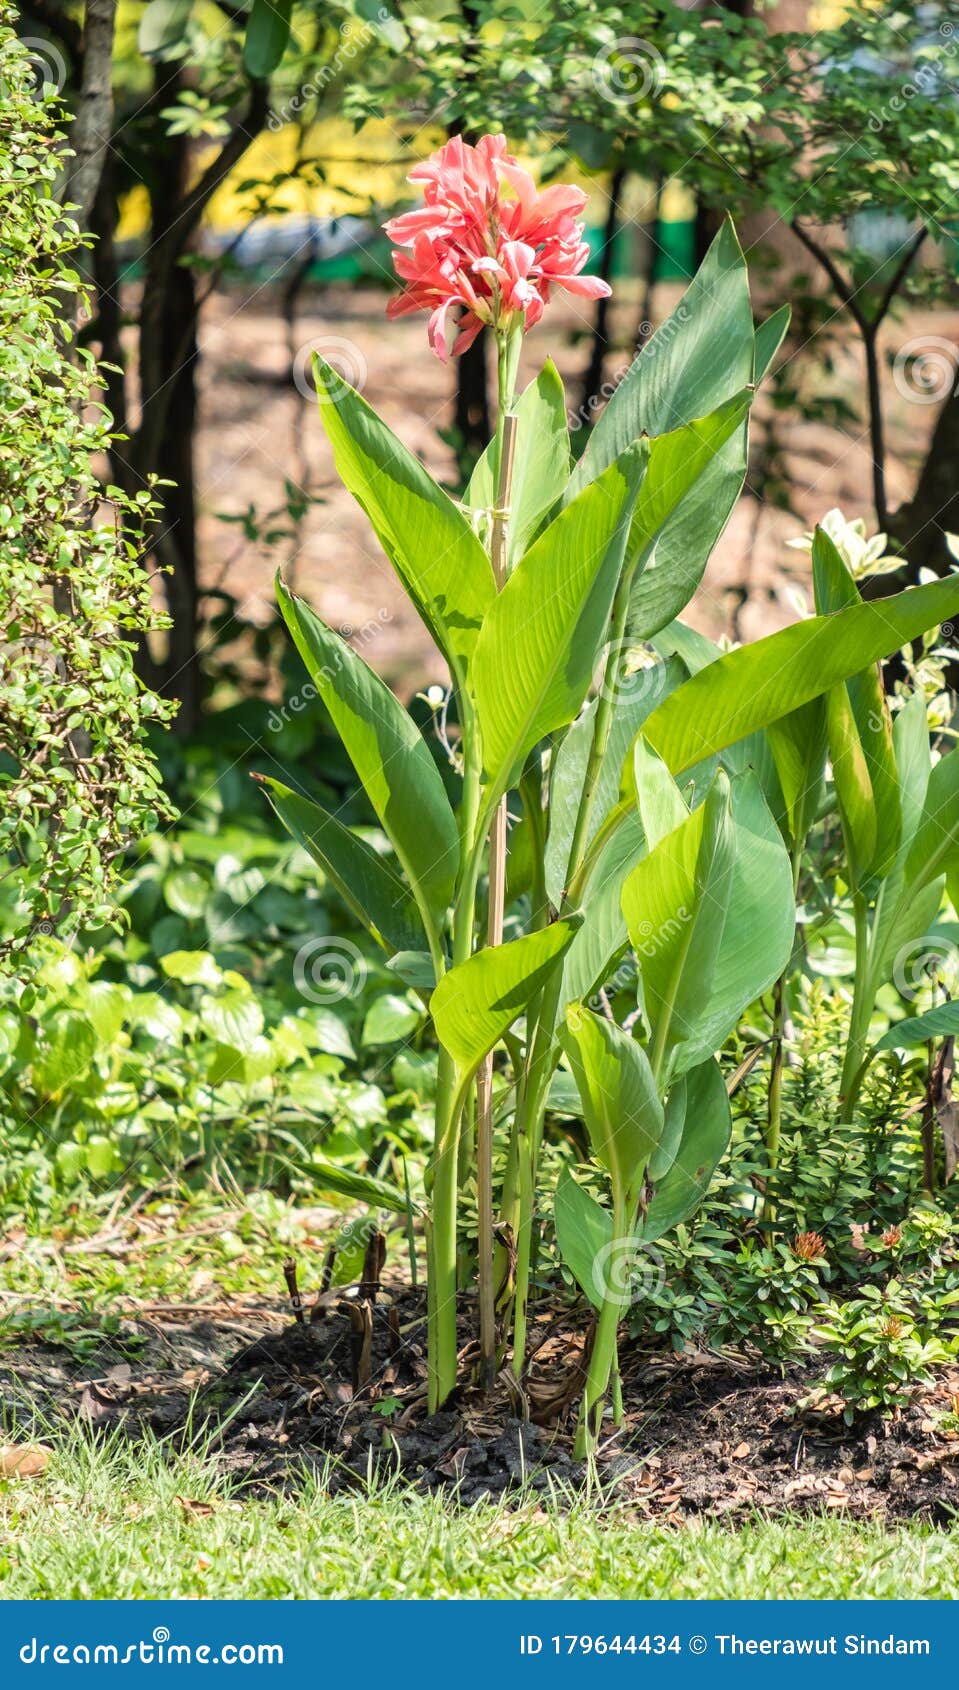 Canna Lily Flowers Grow In The Green Belt Stock Photo Image Of Horizontal Plant 179644434